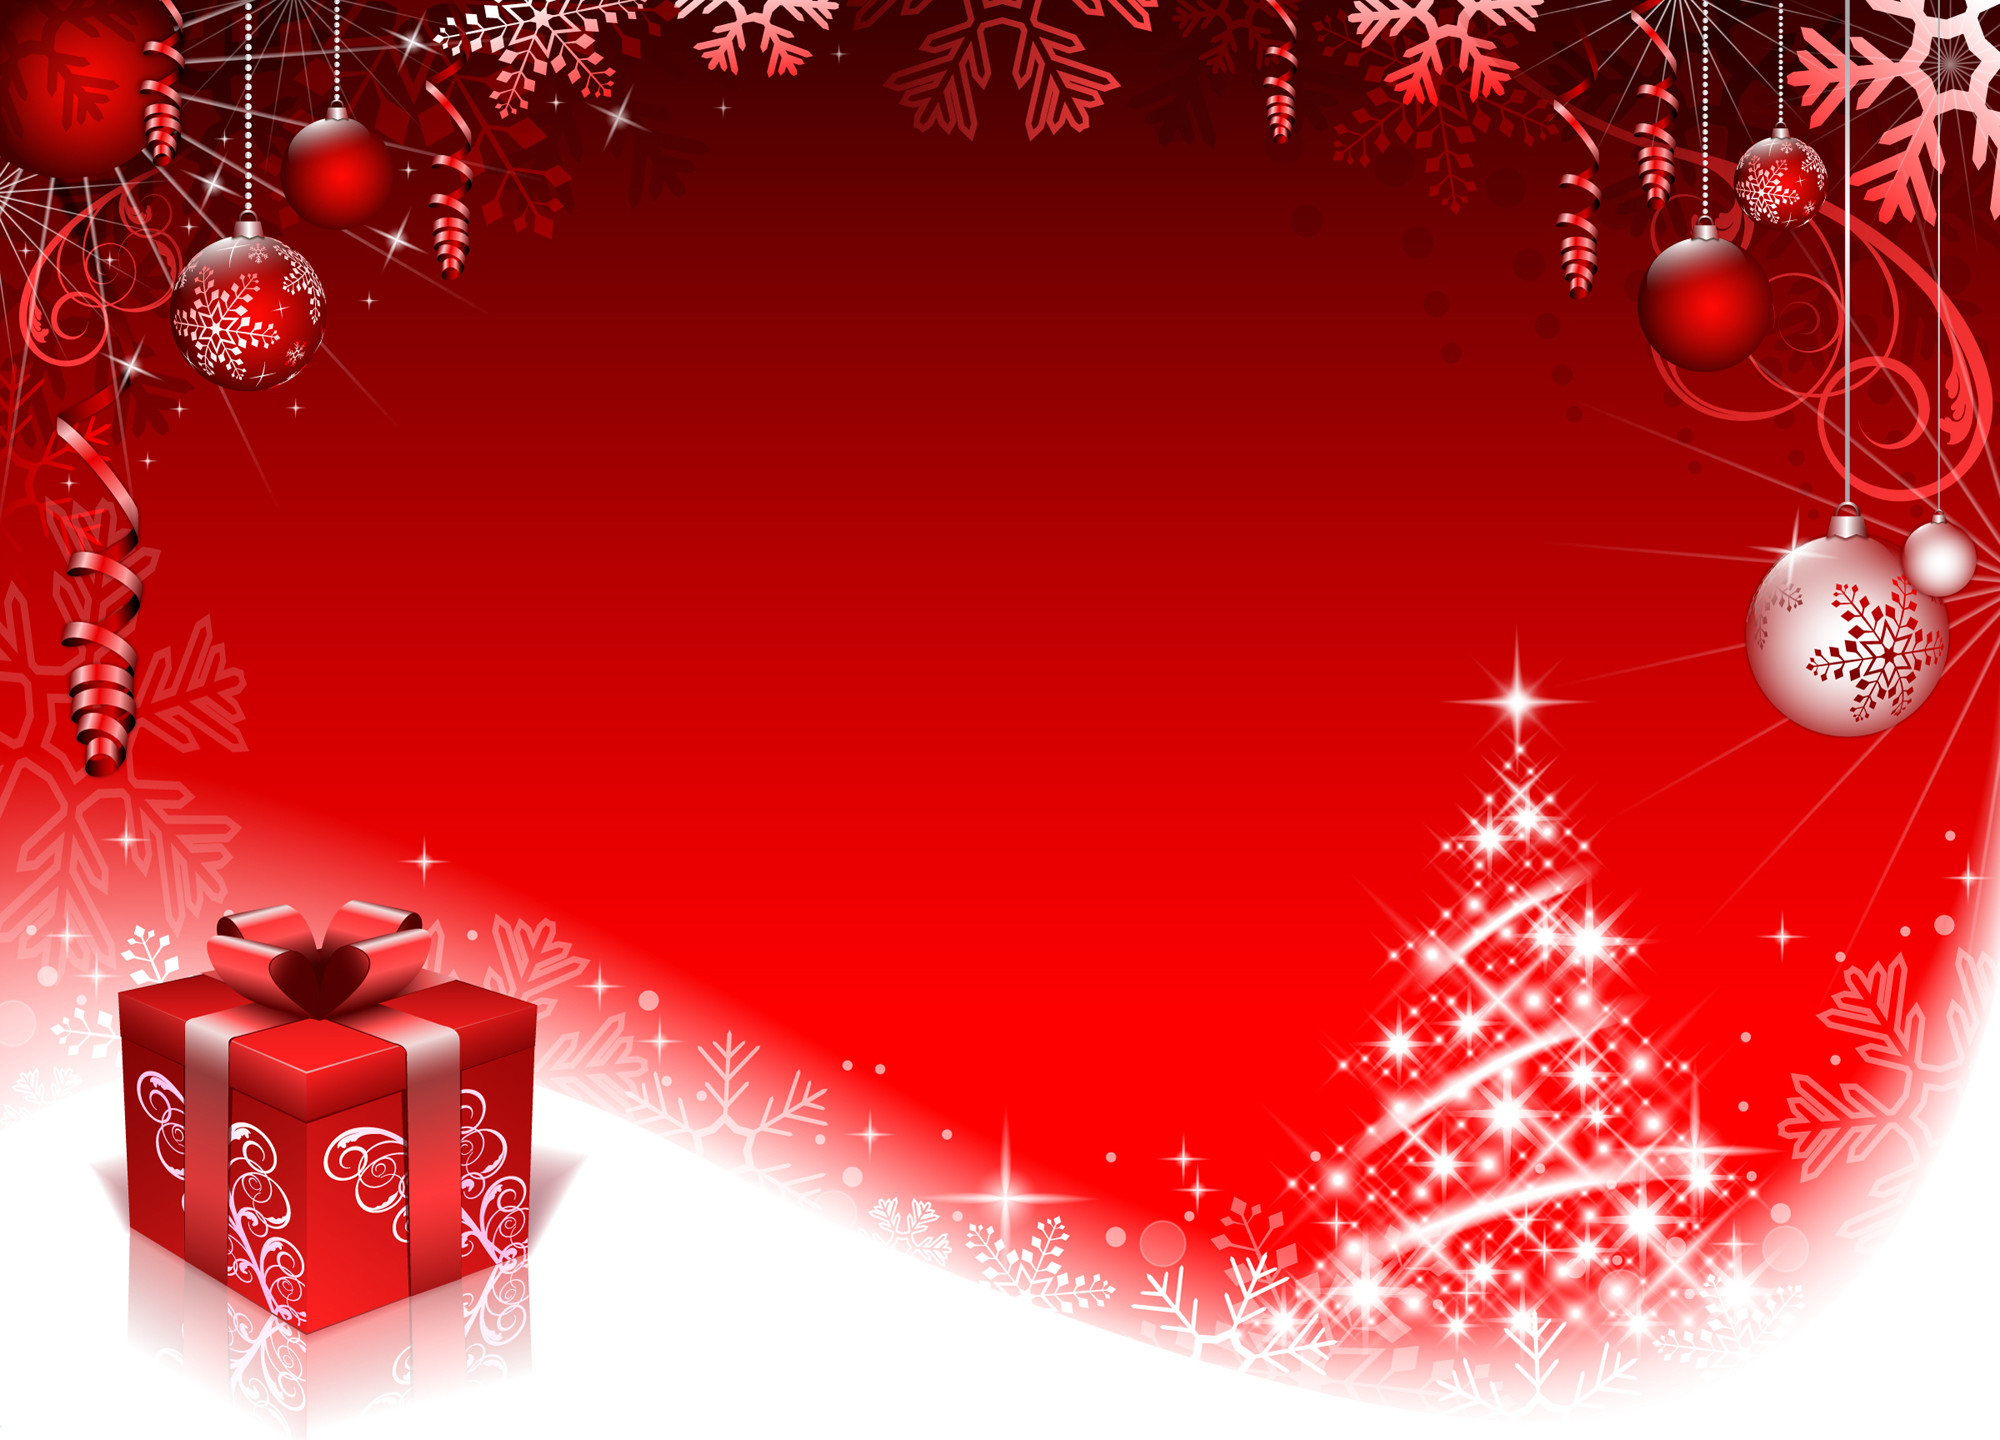 2000x1440 Christmas Backgrounds for Photoshop | Wallpapers9